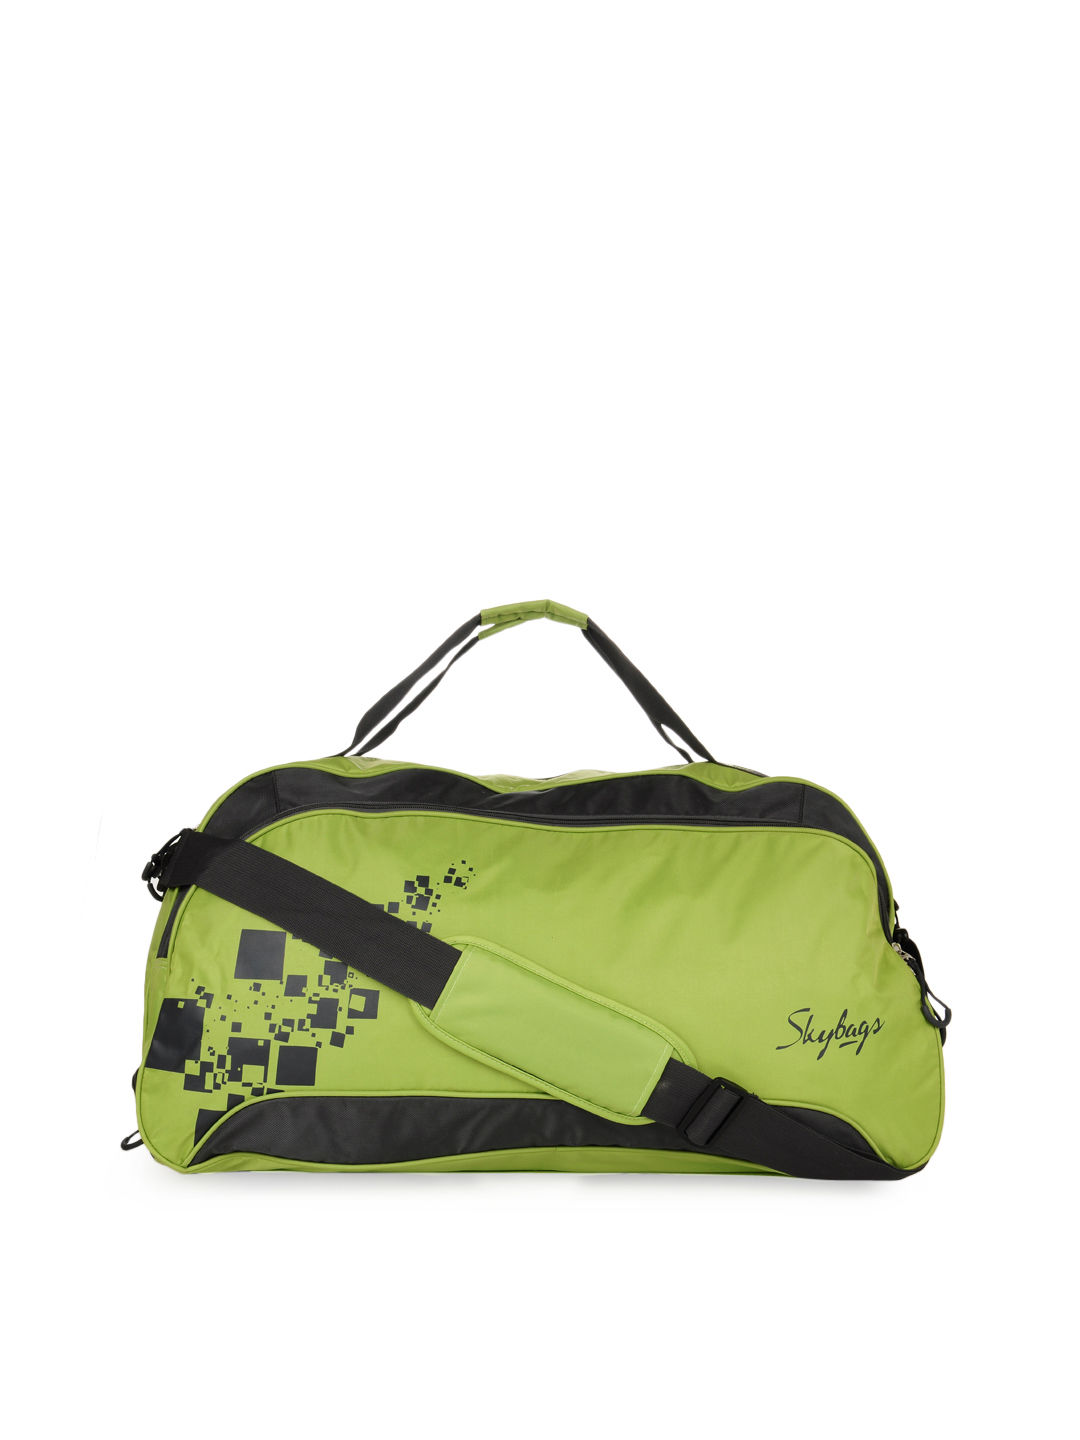 Skybags Unisex Green Printed Duffle Bag